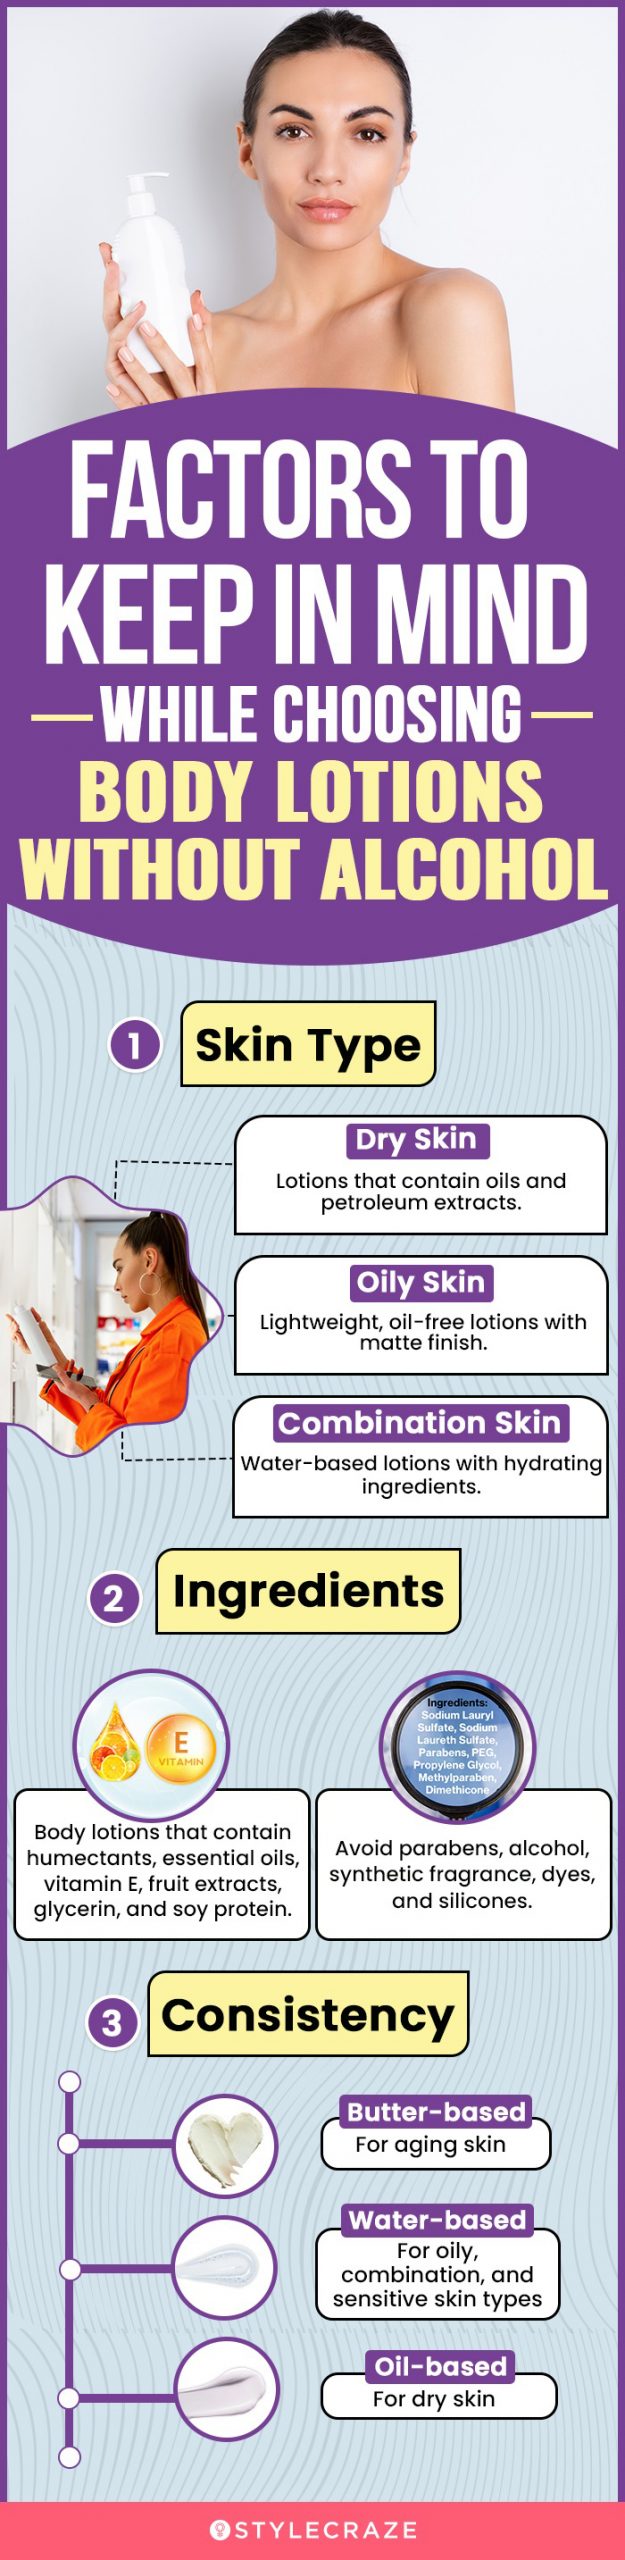 Factors To Keep In Mind To Choose The Best Body Lotion Without Alcohol (infographic)